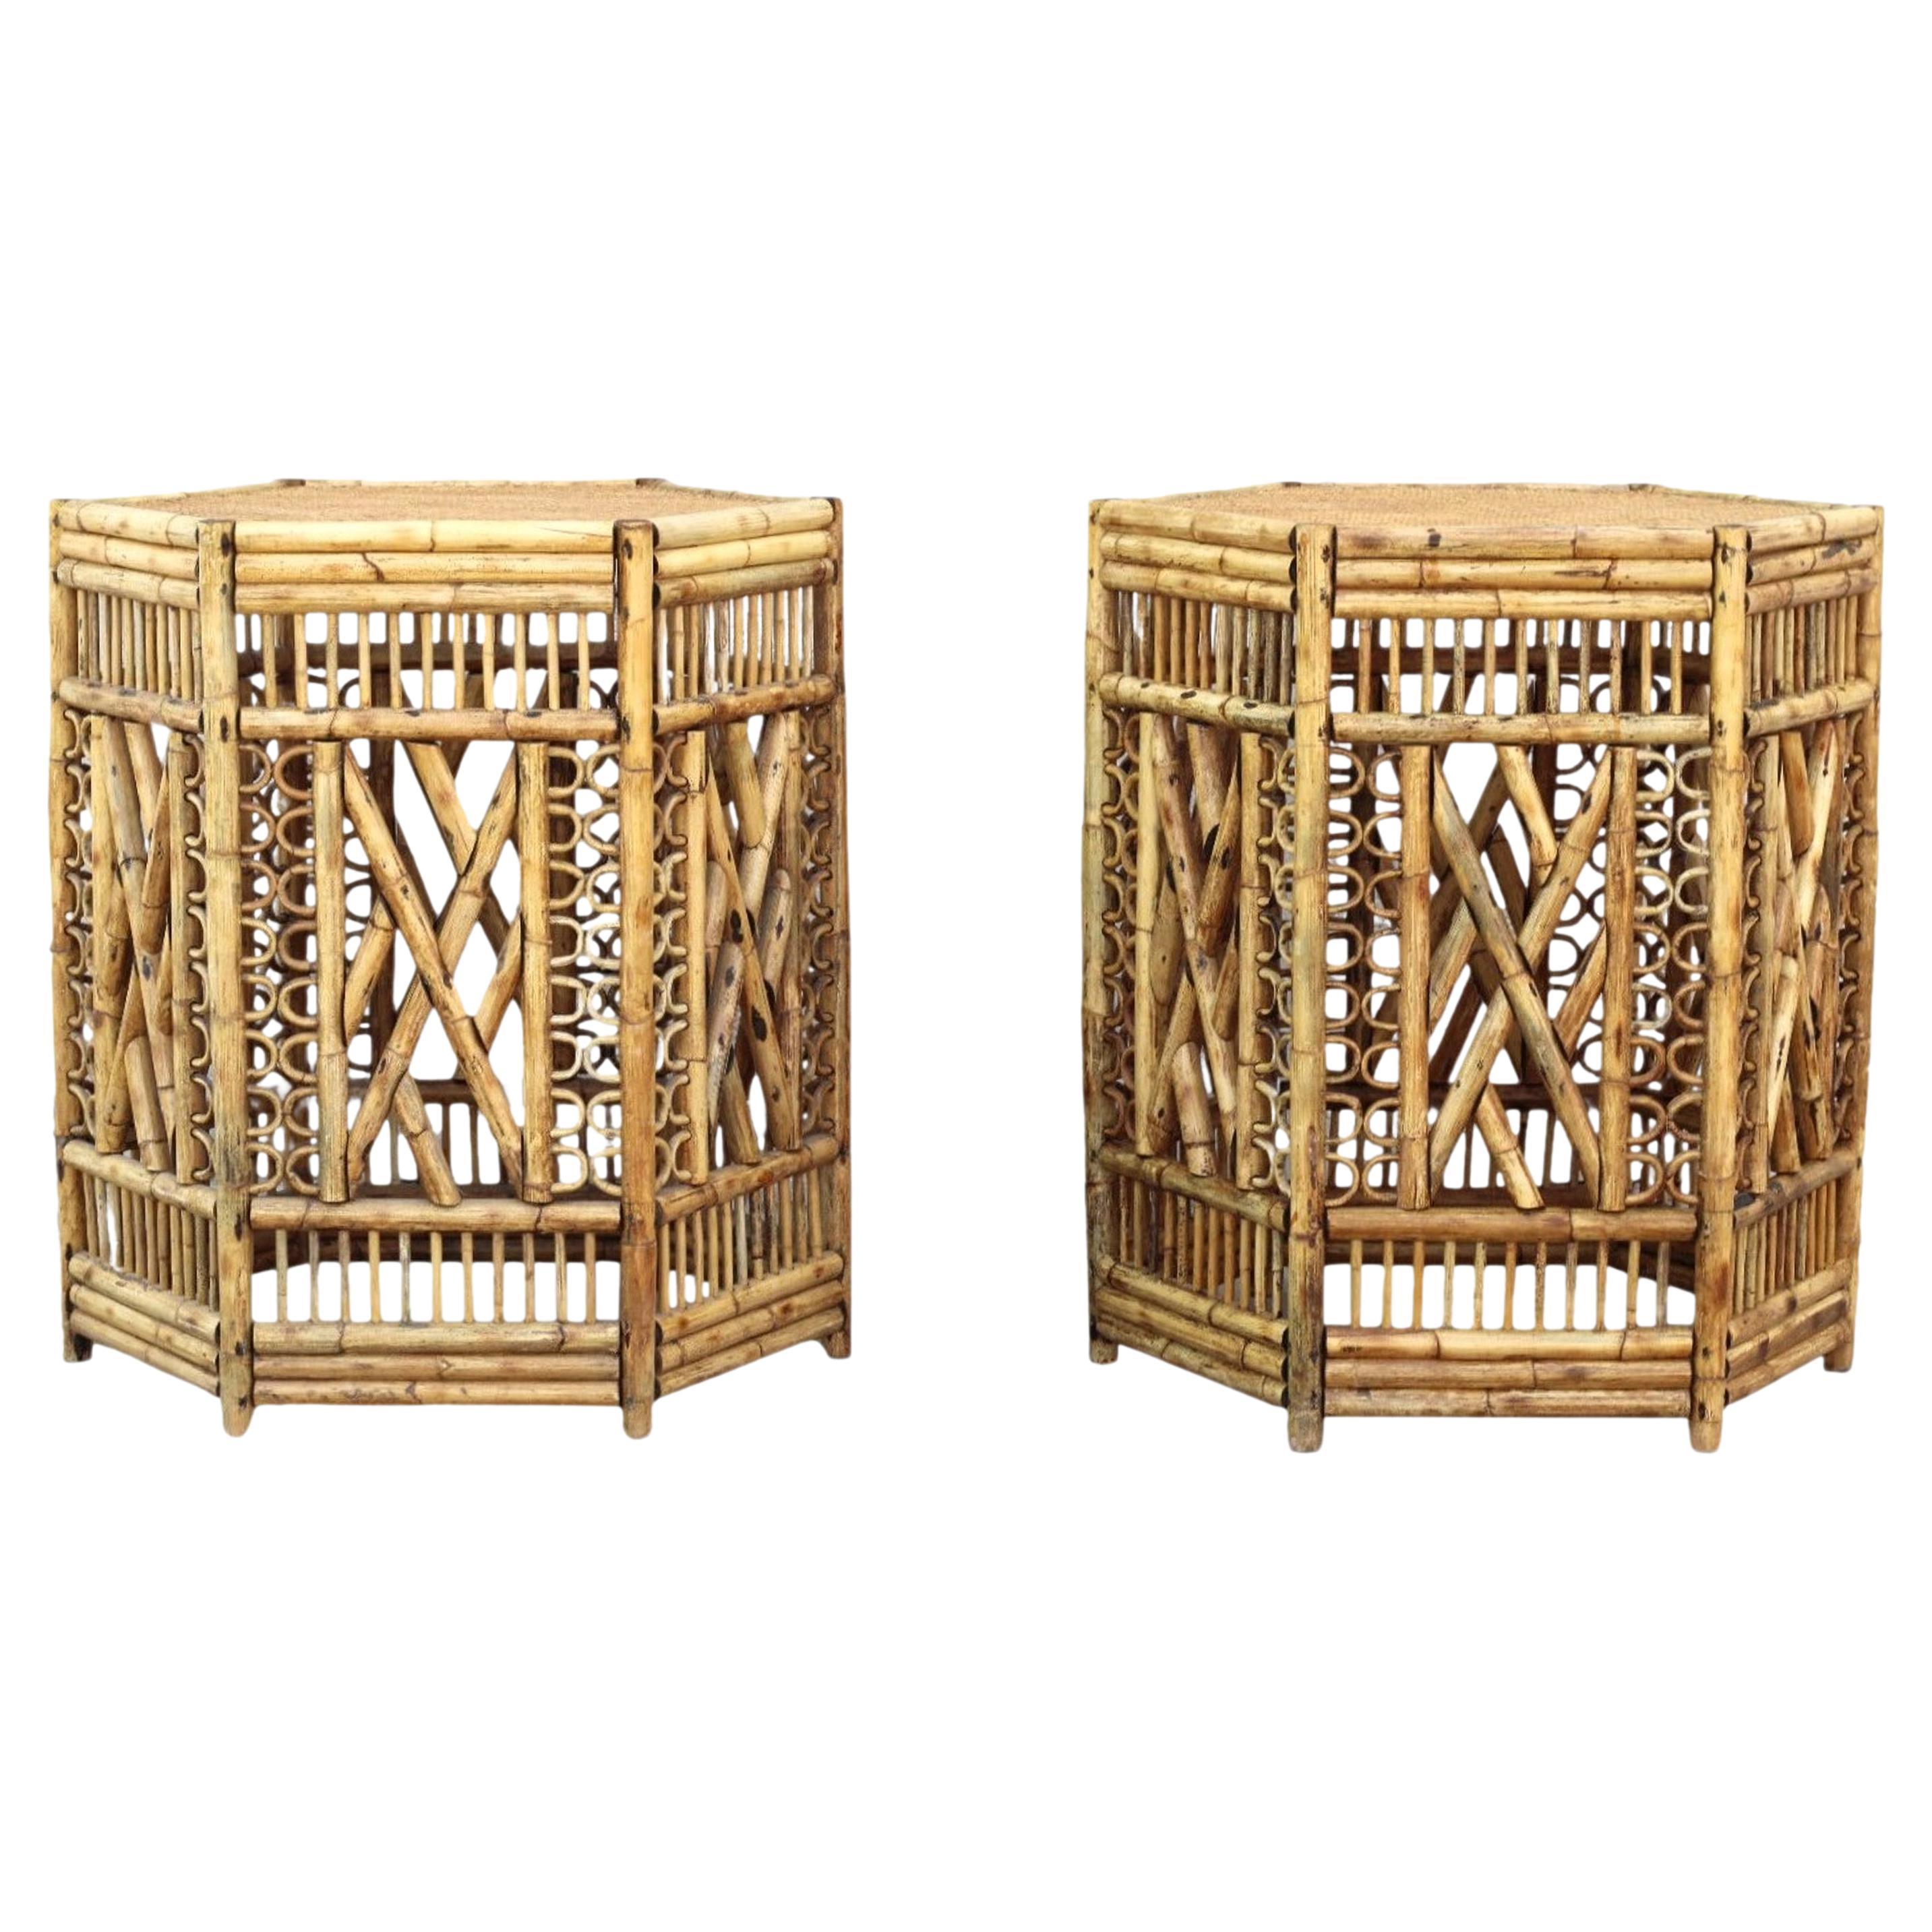 Pair of Brighton Style Bamboo and Cane Hexagonal Dining Table Bases